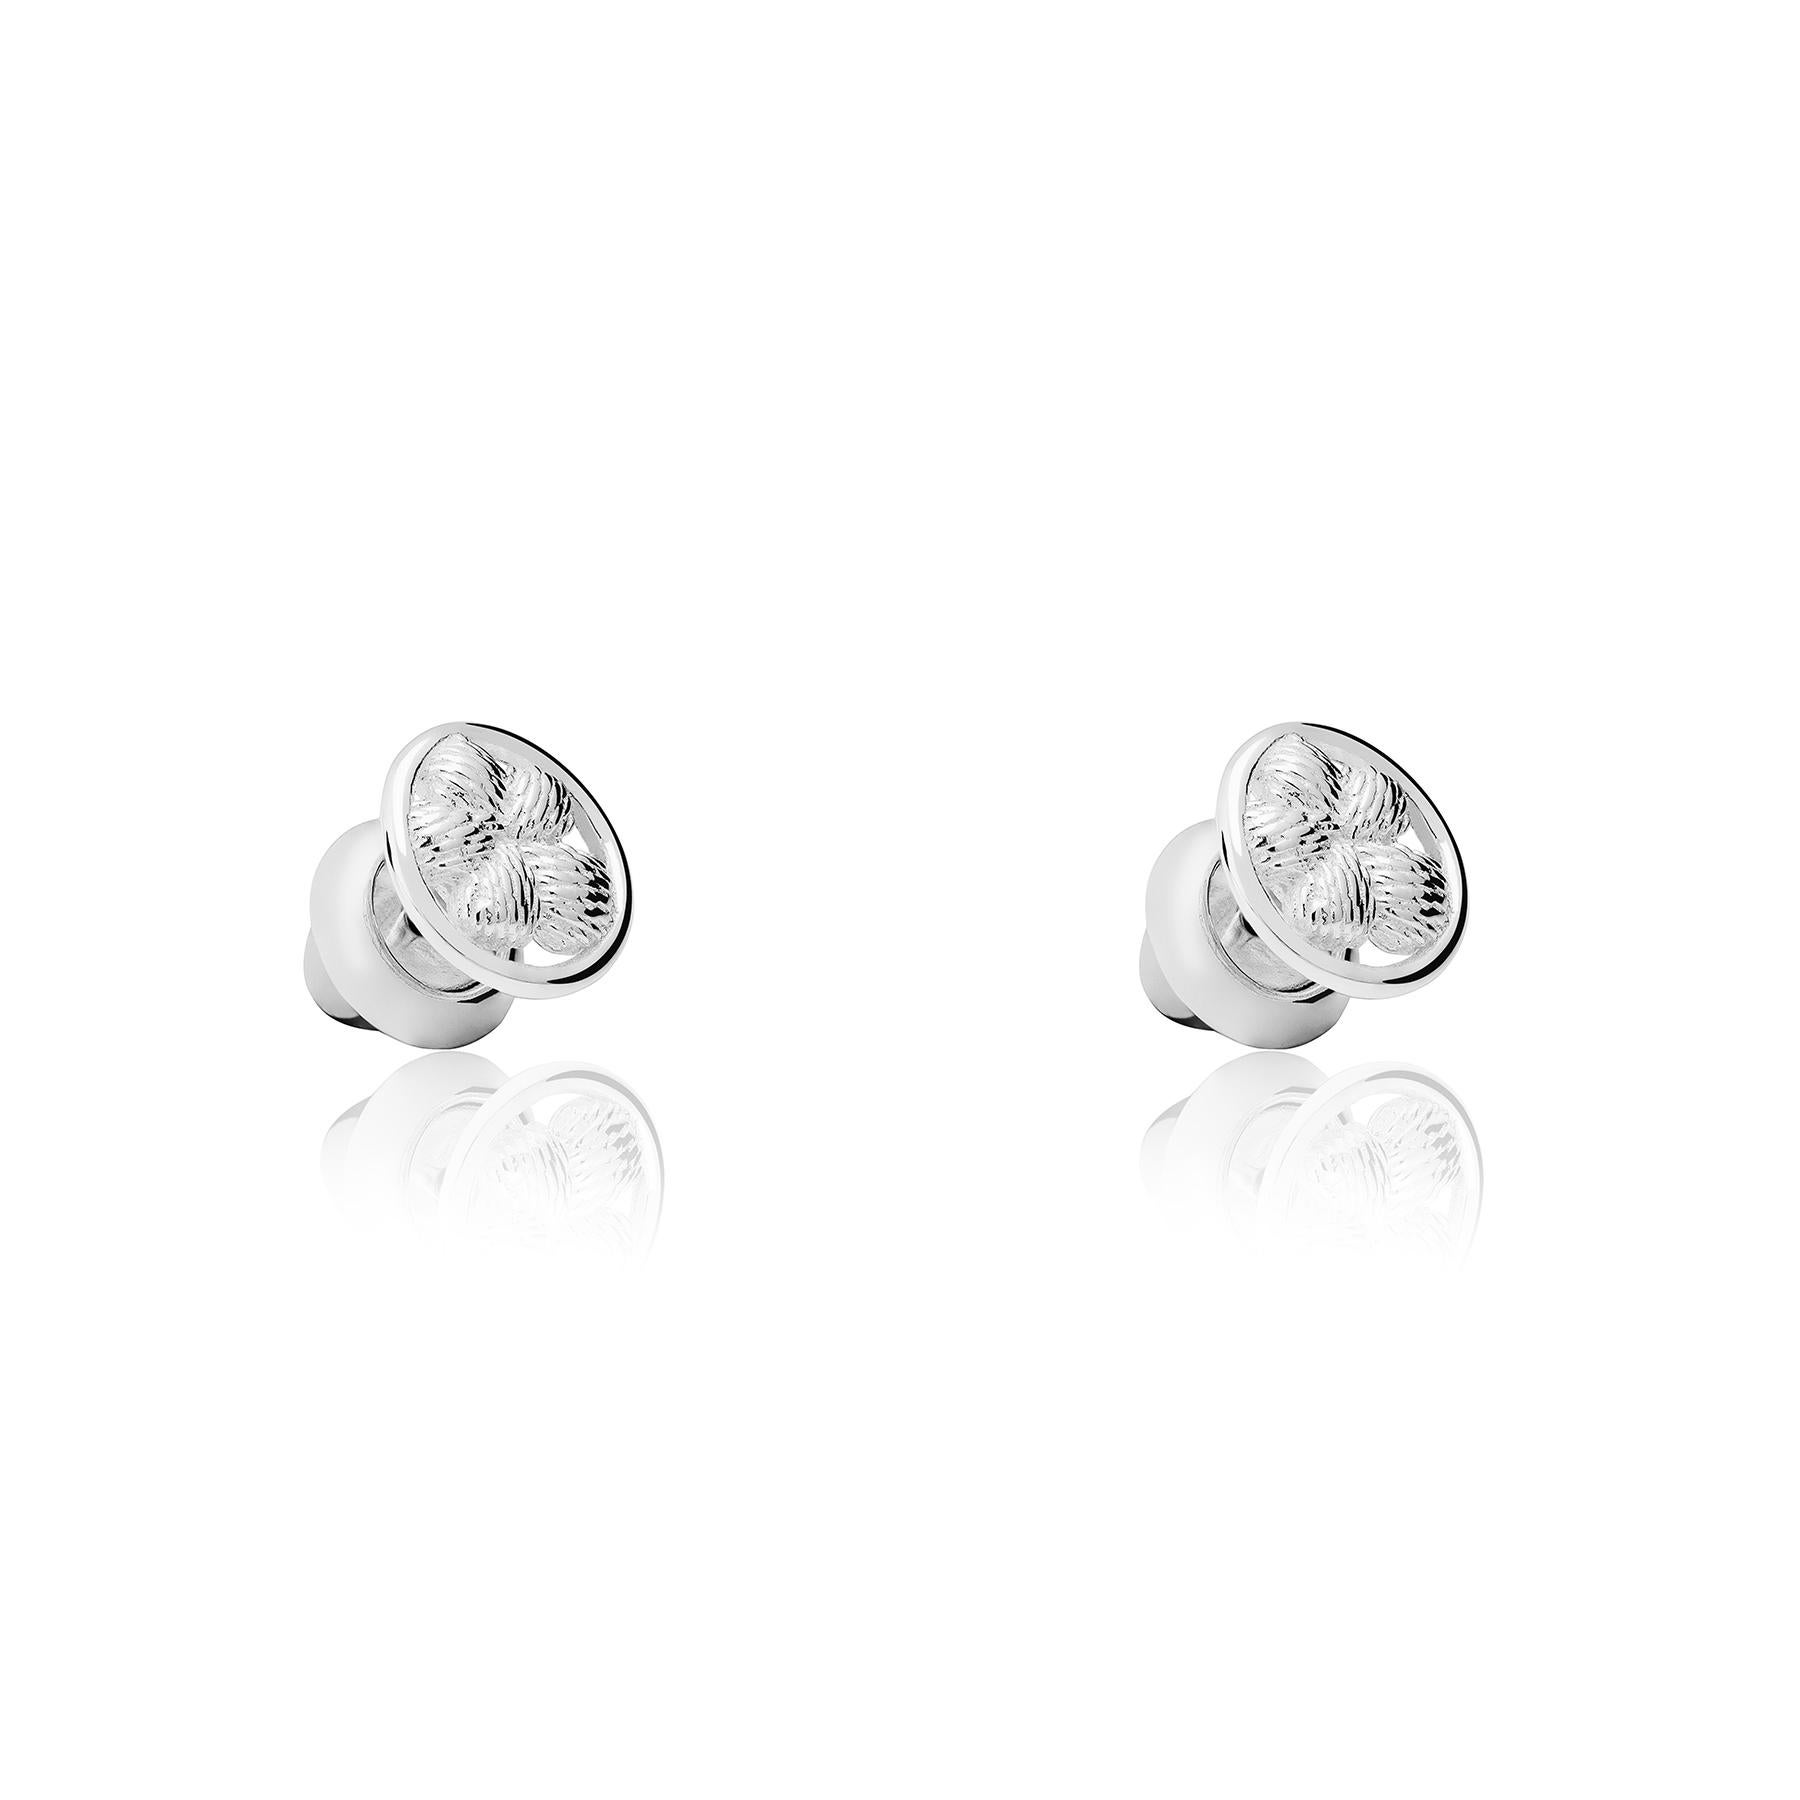 The Bordados Flower Button Earrings from the Bordados Collection by TANE are handmade in sterling silver by TANE's expert artisans in Mexico. The button silhouette frames a flower whose texture recreates in silver the thread with which the original